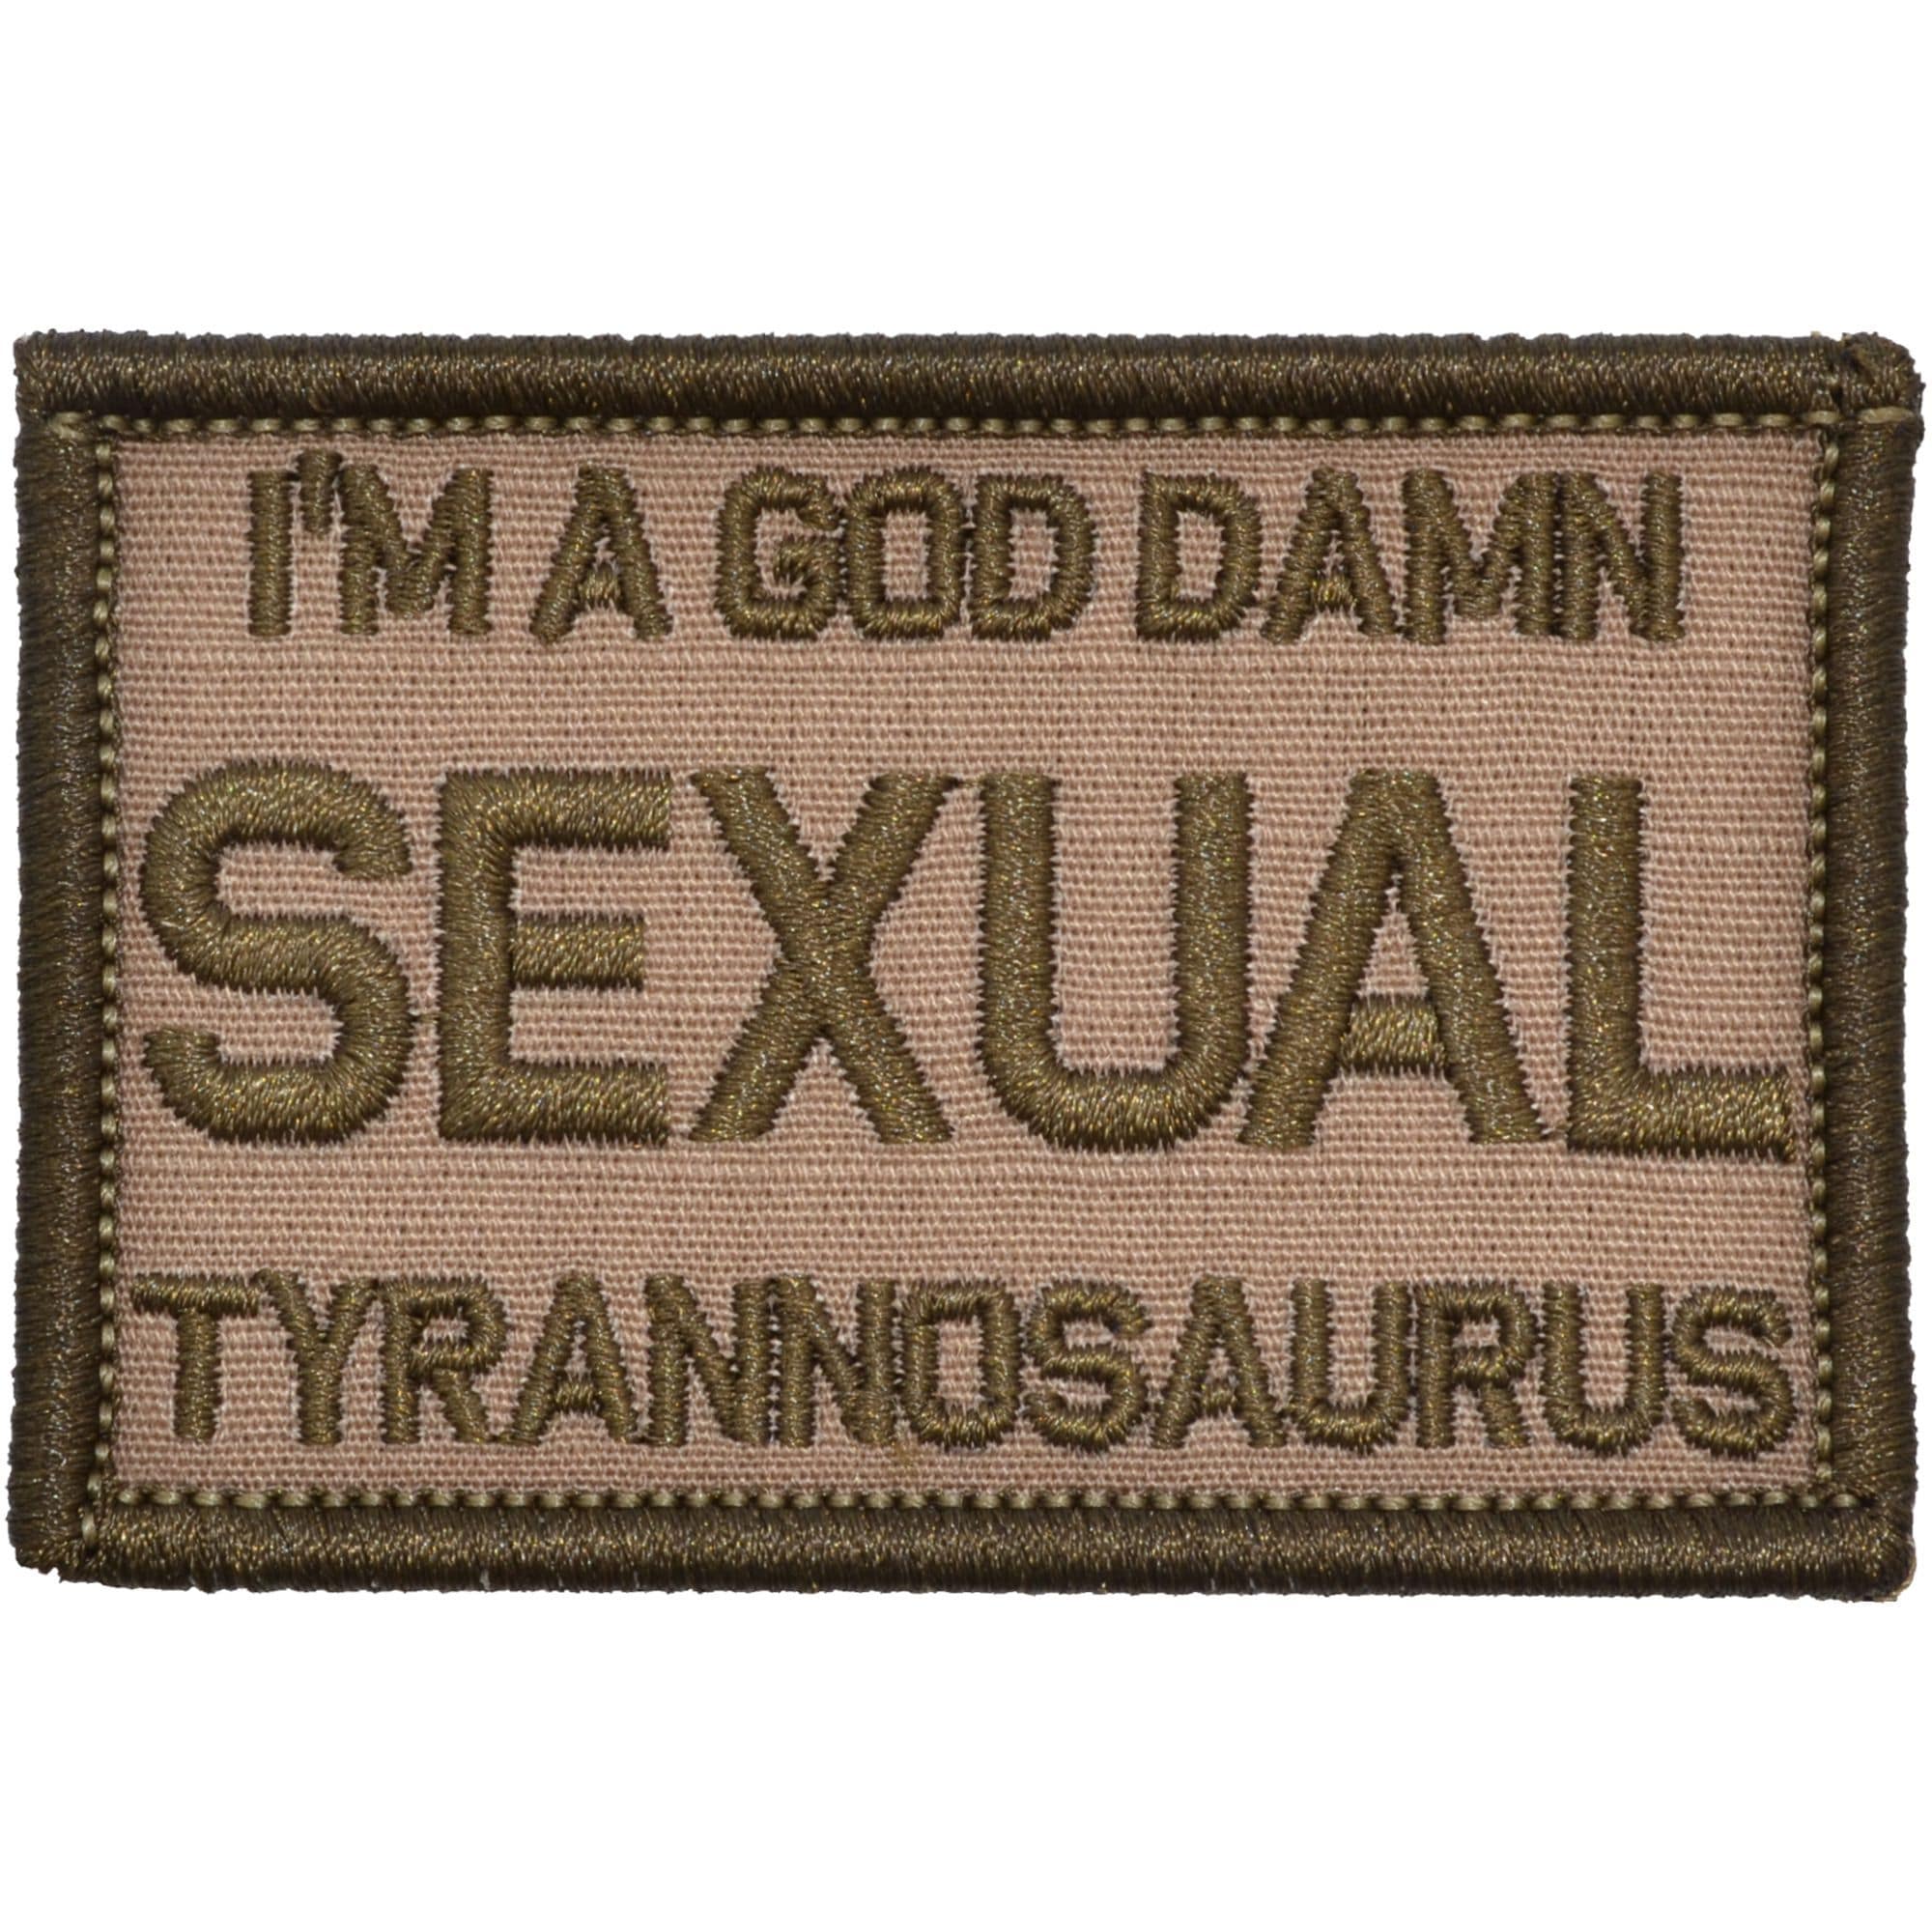 Tactical Gear Junkie Patches Coyote Brown I'm a God Damn Sexual Tyrannosaurus - 2x3 Patch